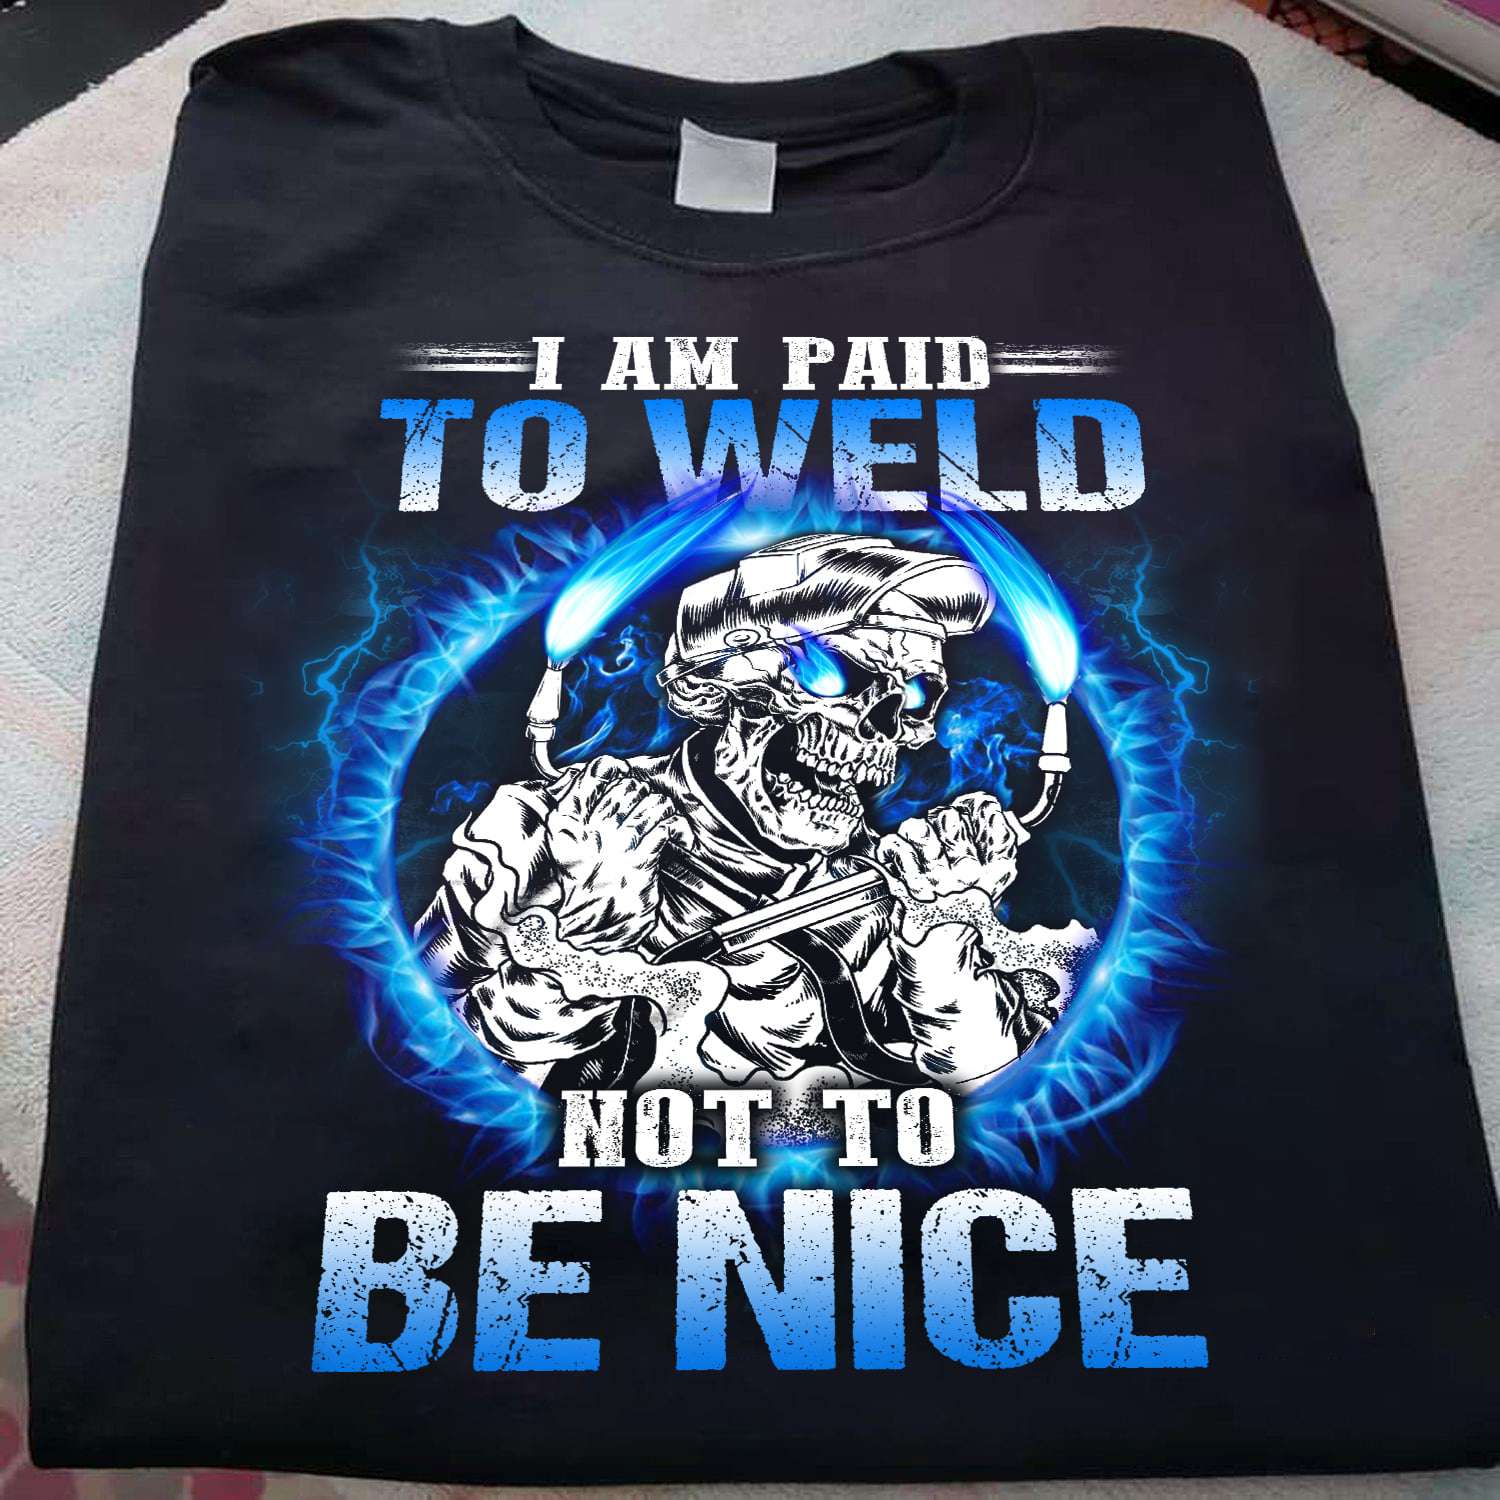 I am paid to weld not to be nice - Angry skull welder, welder the job